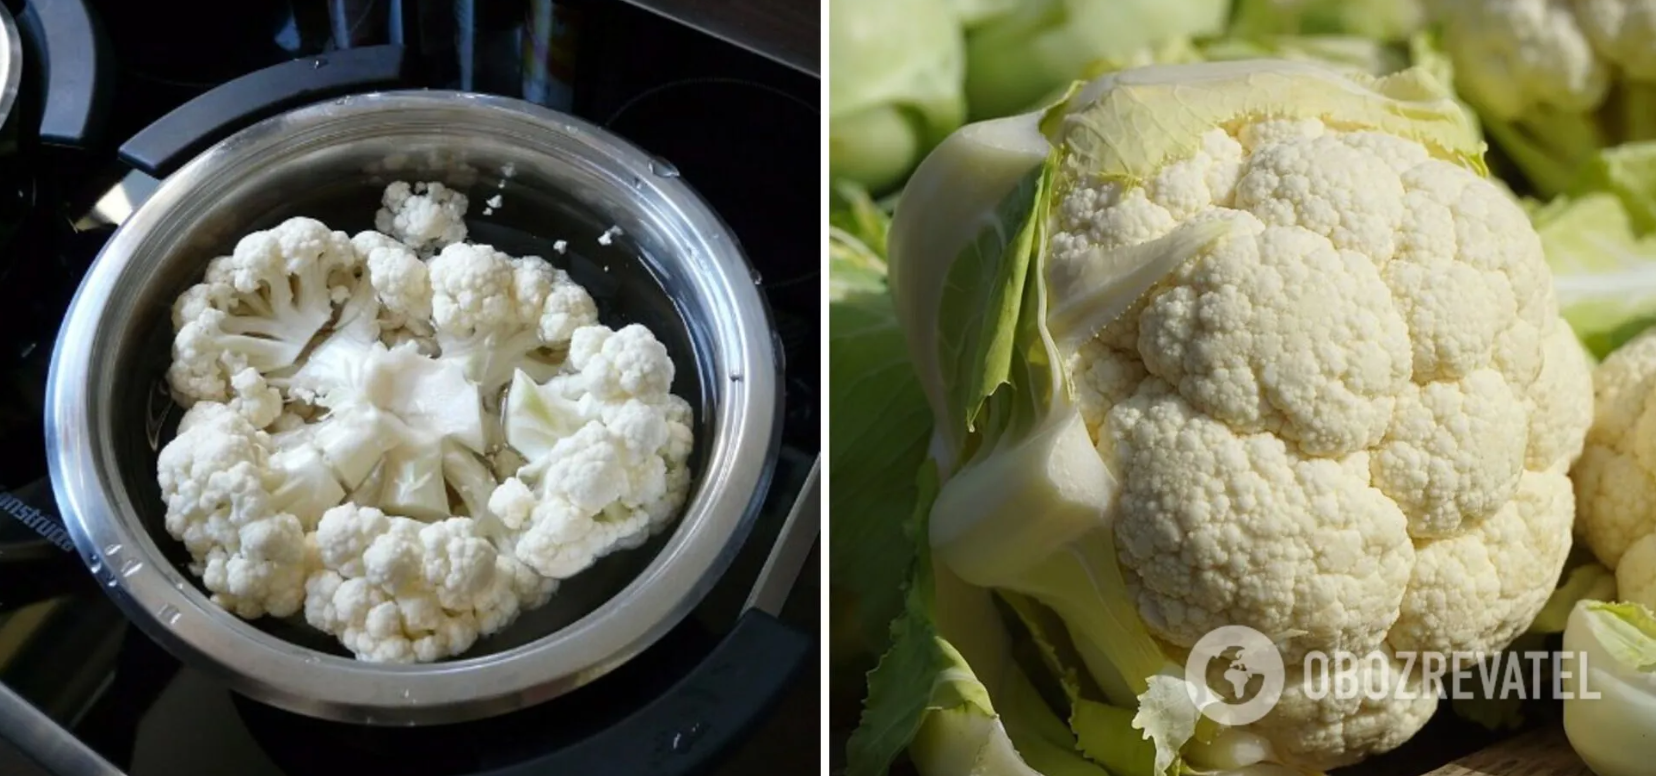 How to cook cauliflower properly and how long to boil